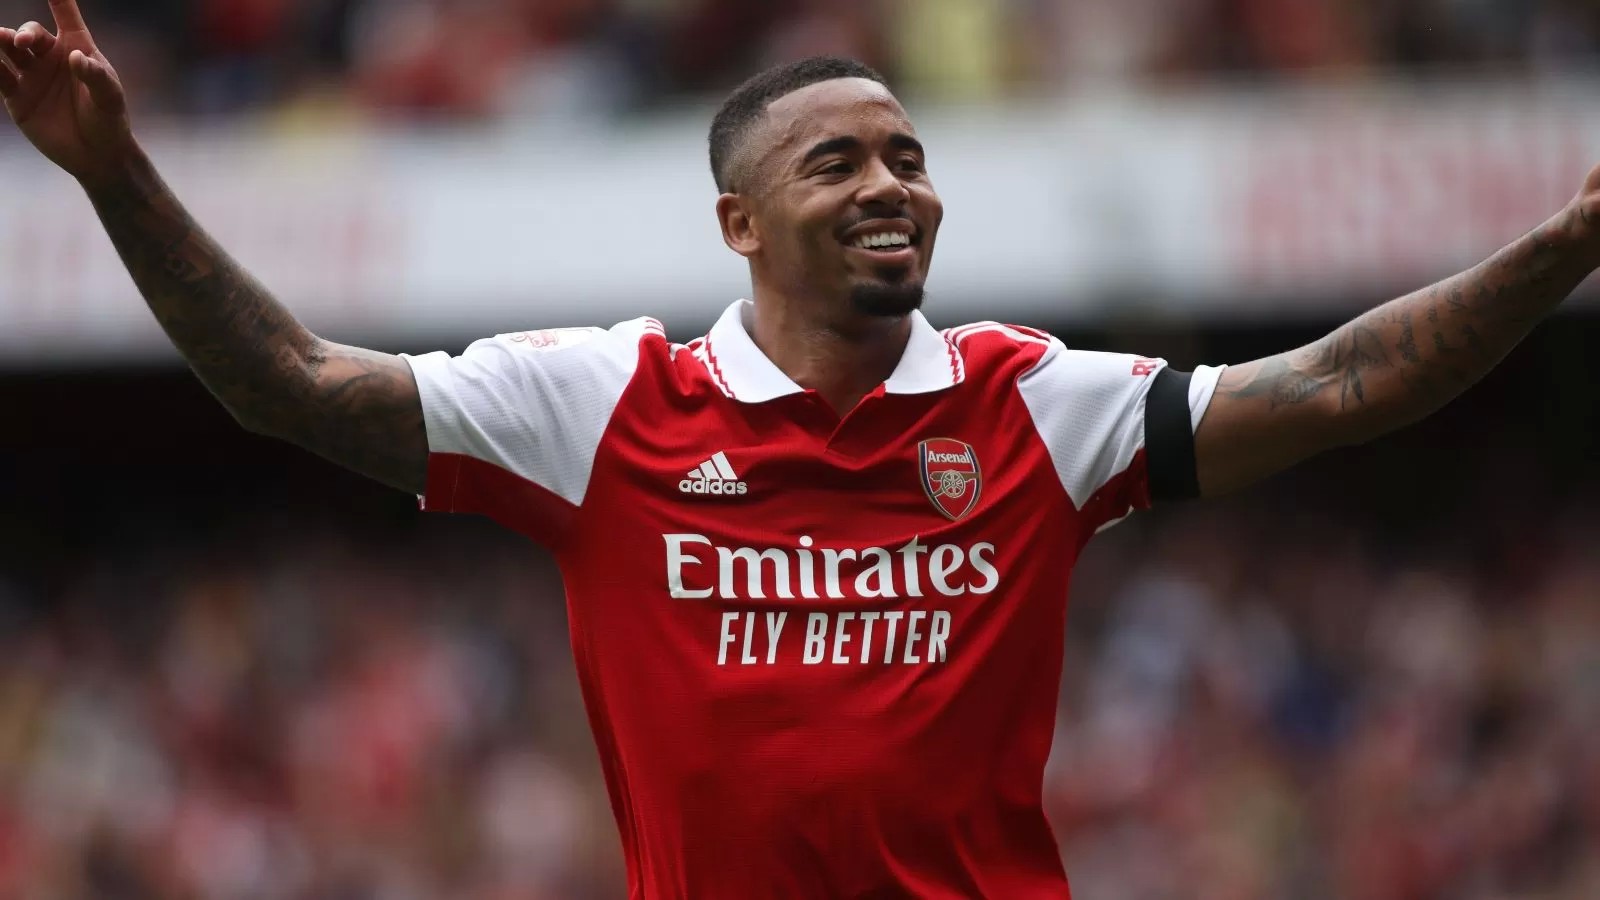 Arsenal forward Jesus backed by Brazil legend to become ‘one of best players in Europe’